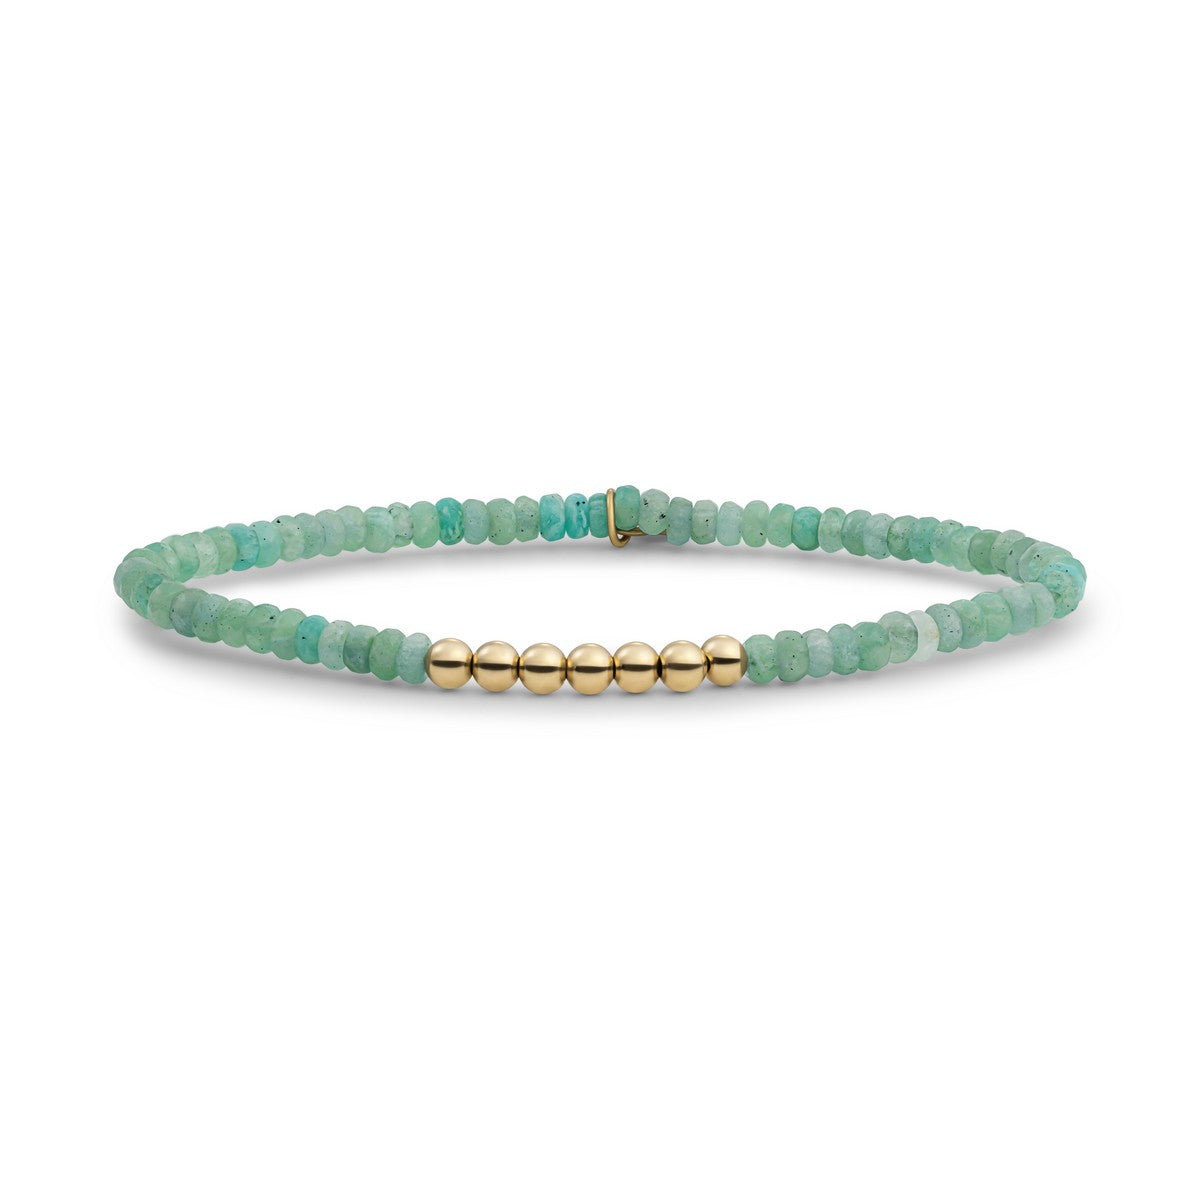 Sparkling Jewels Armband | Rich Green Amazonite 4mm Reverse Universe | gold plated SB-G-4MM-RLI-G57